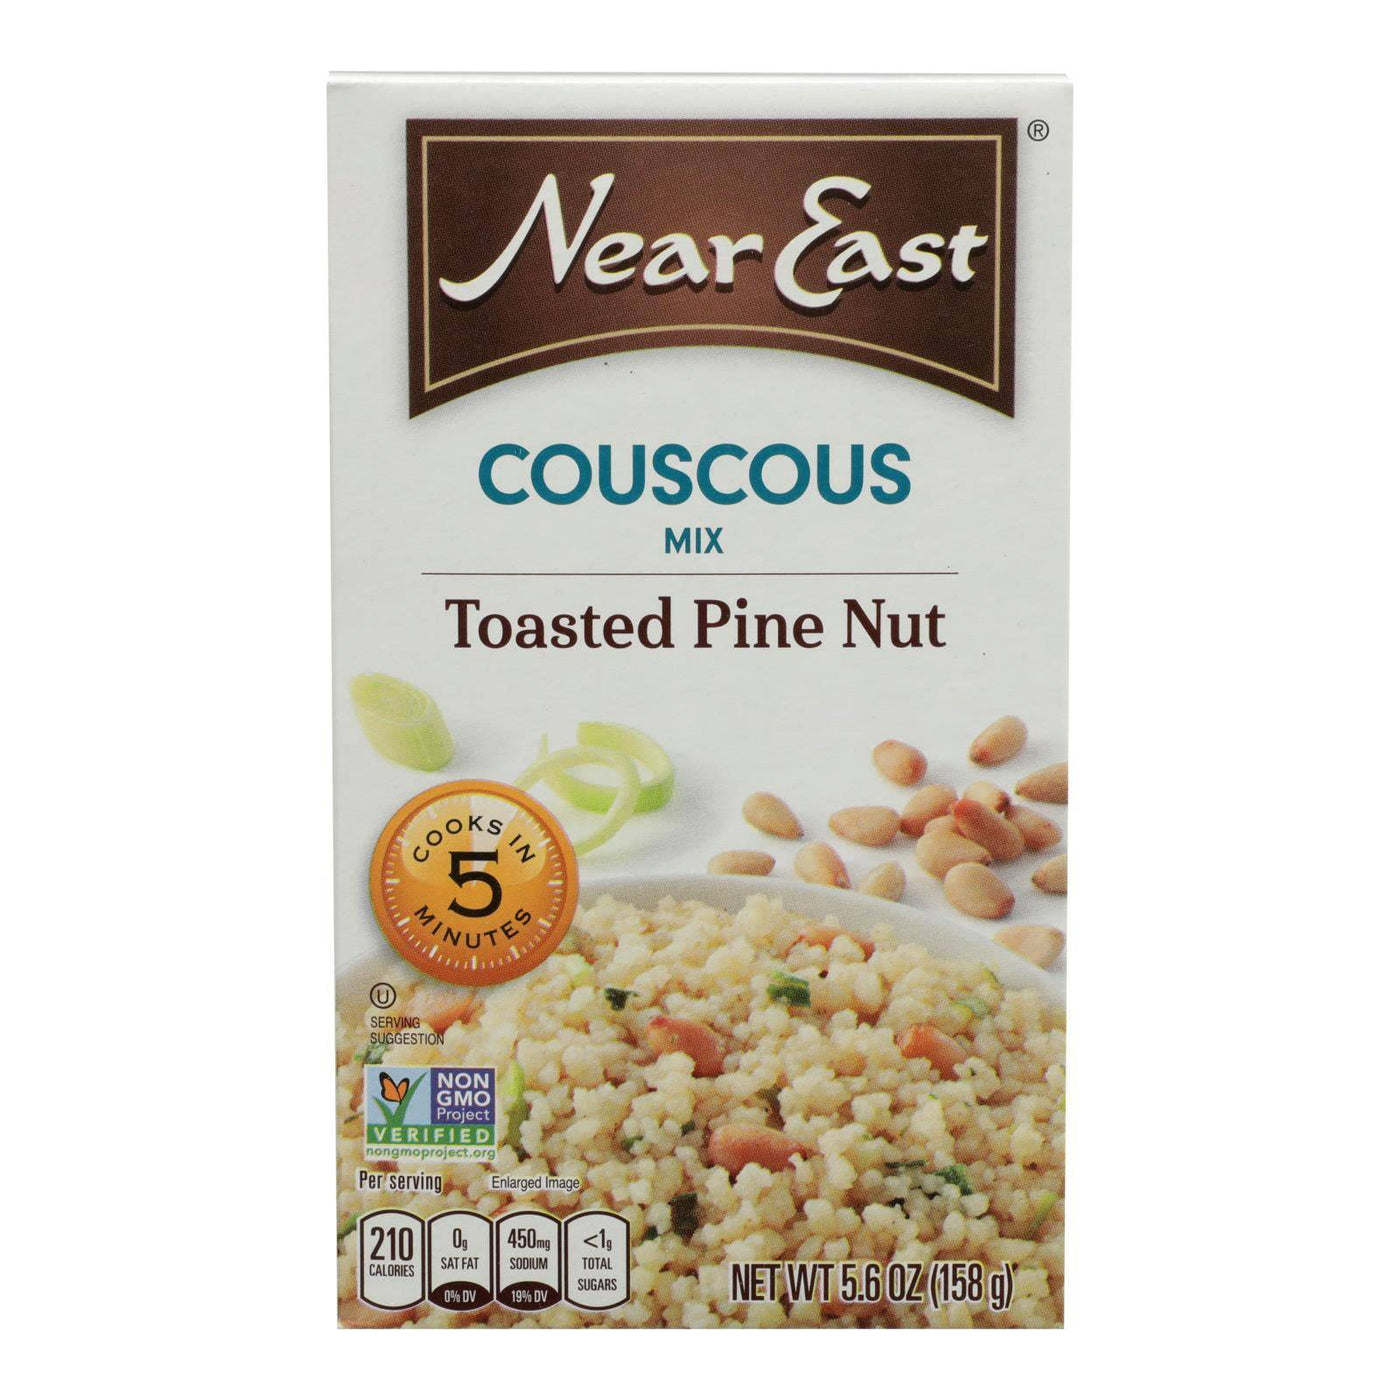 Near East Couscous Mix - Toasted Pine Nut - Case Of 12 - 5.6 Oz. | OnlyNaturals.us